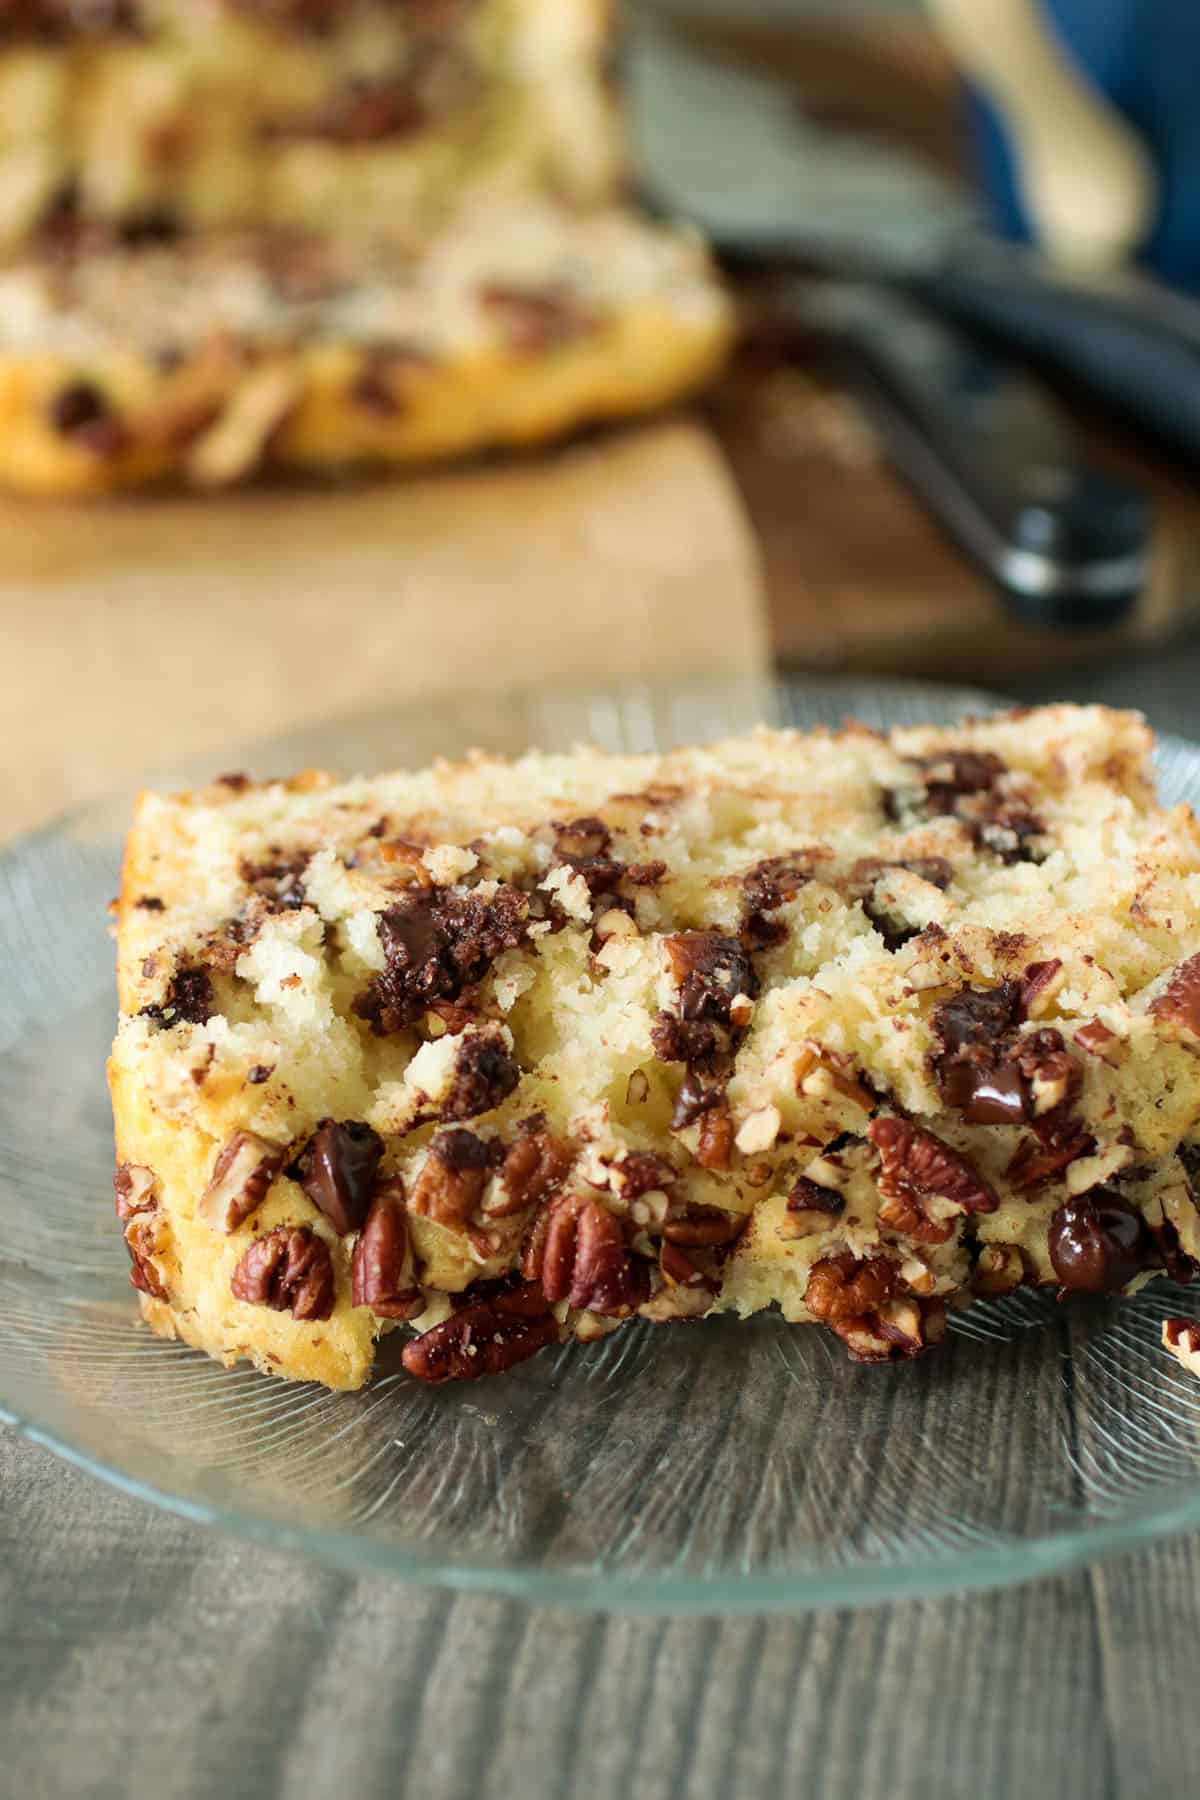 As slice of chocolate chip and pecan quick bread.